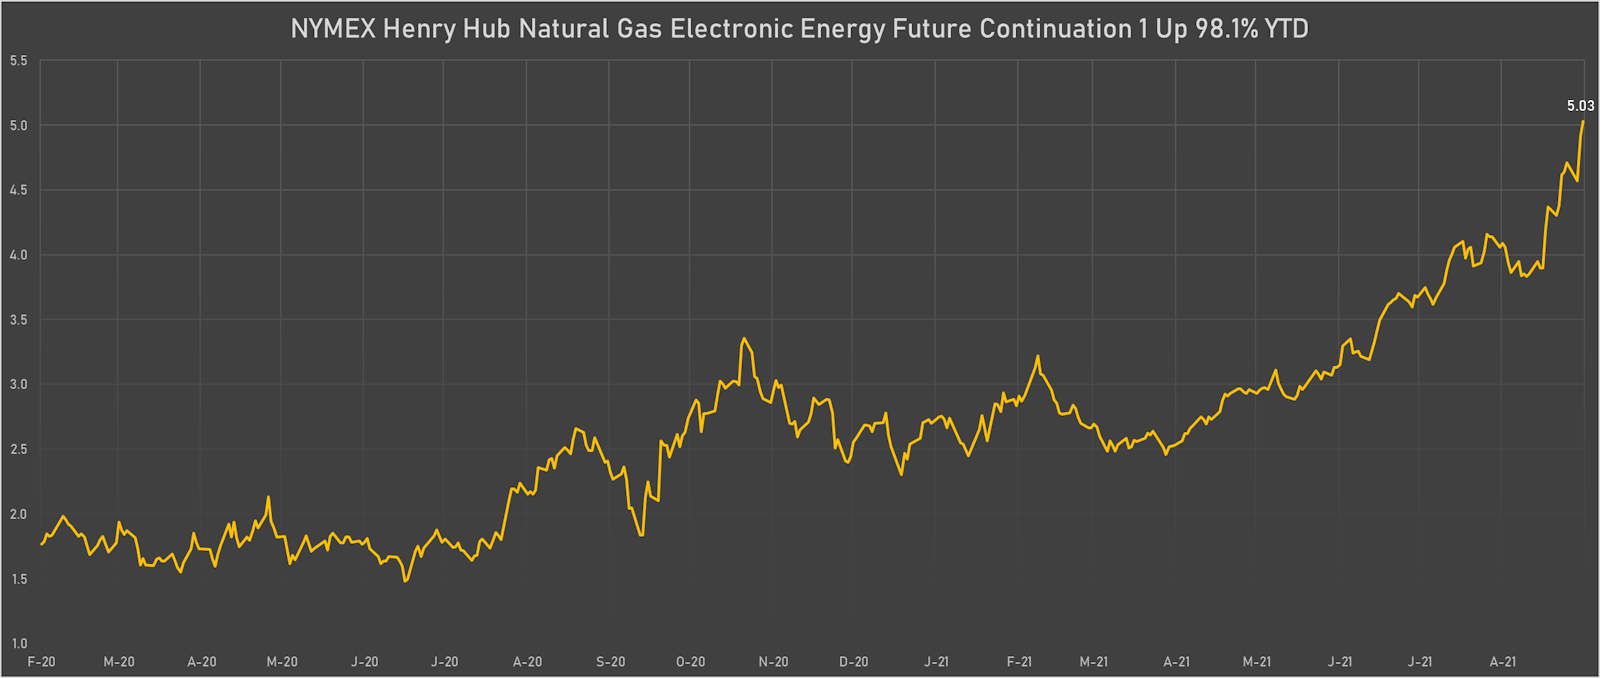 Natural gas front-month futures prices settled above $5 | Sources: ϕpost, Refinitiv data